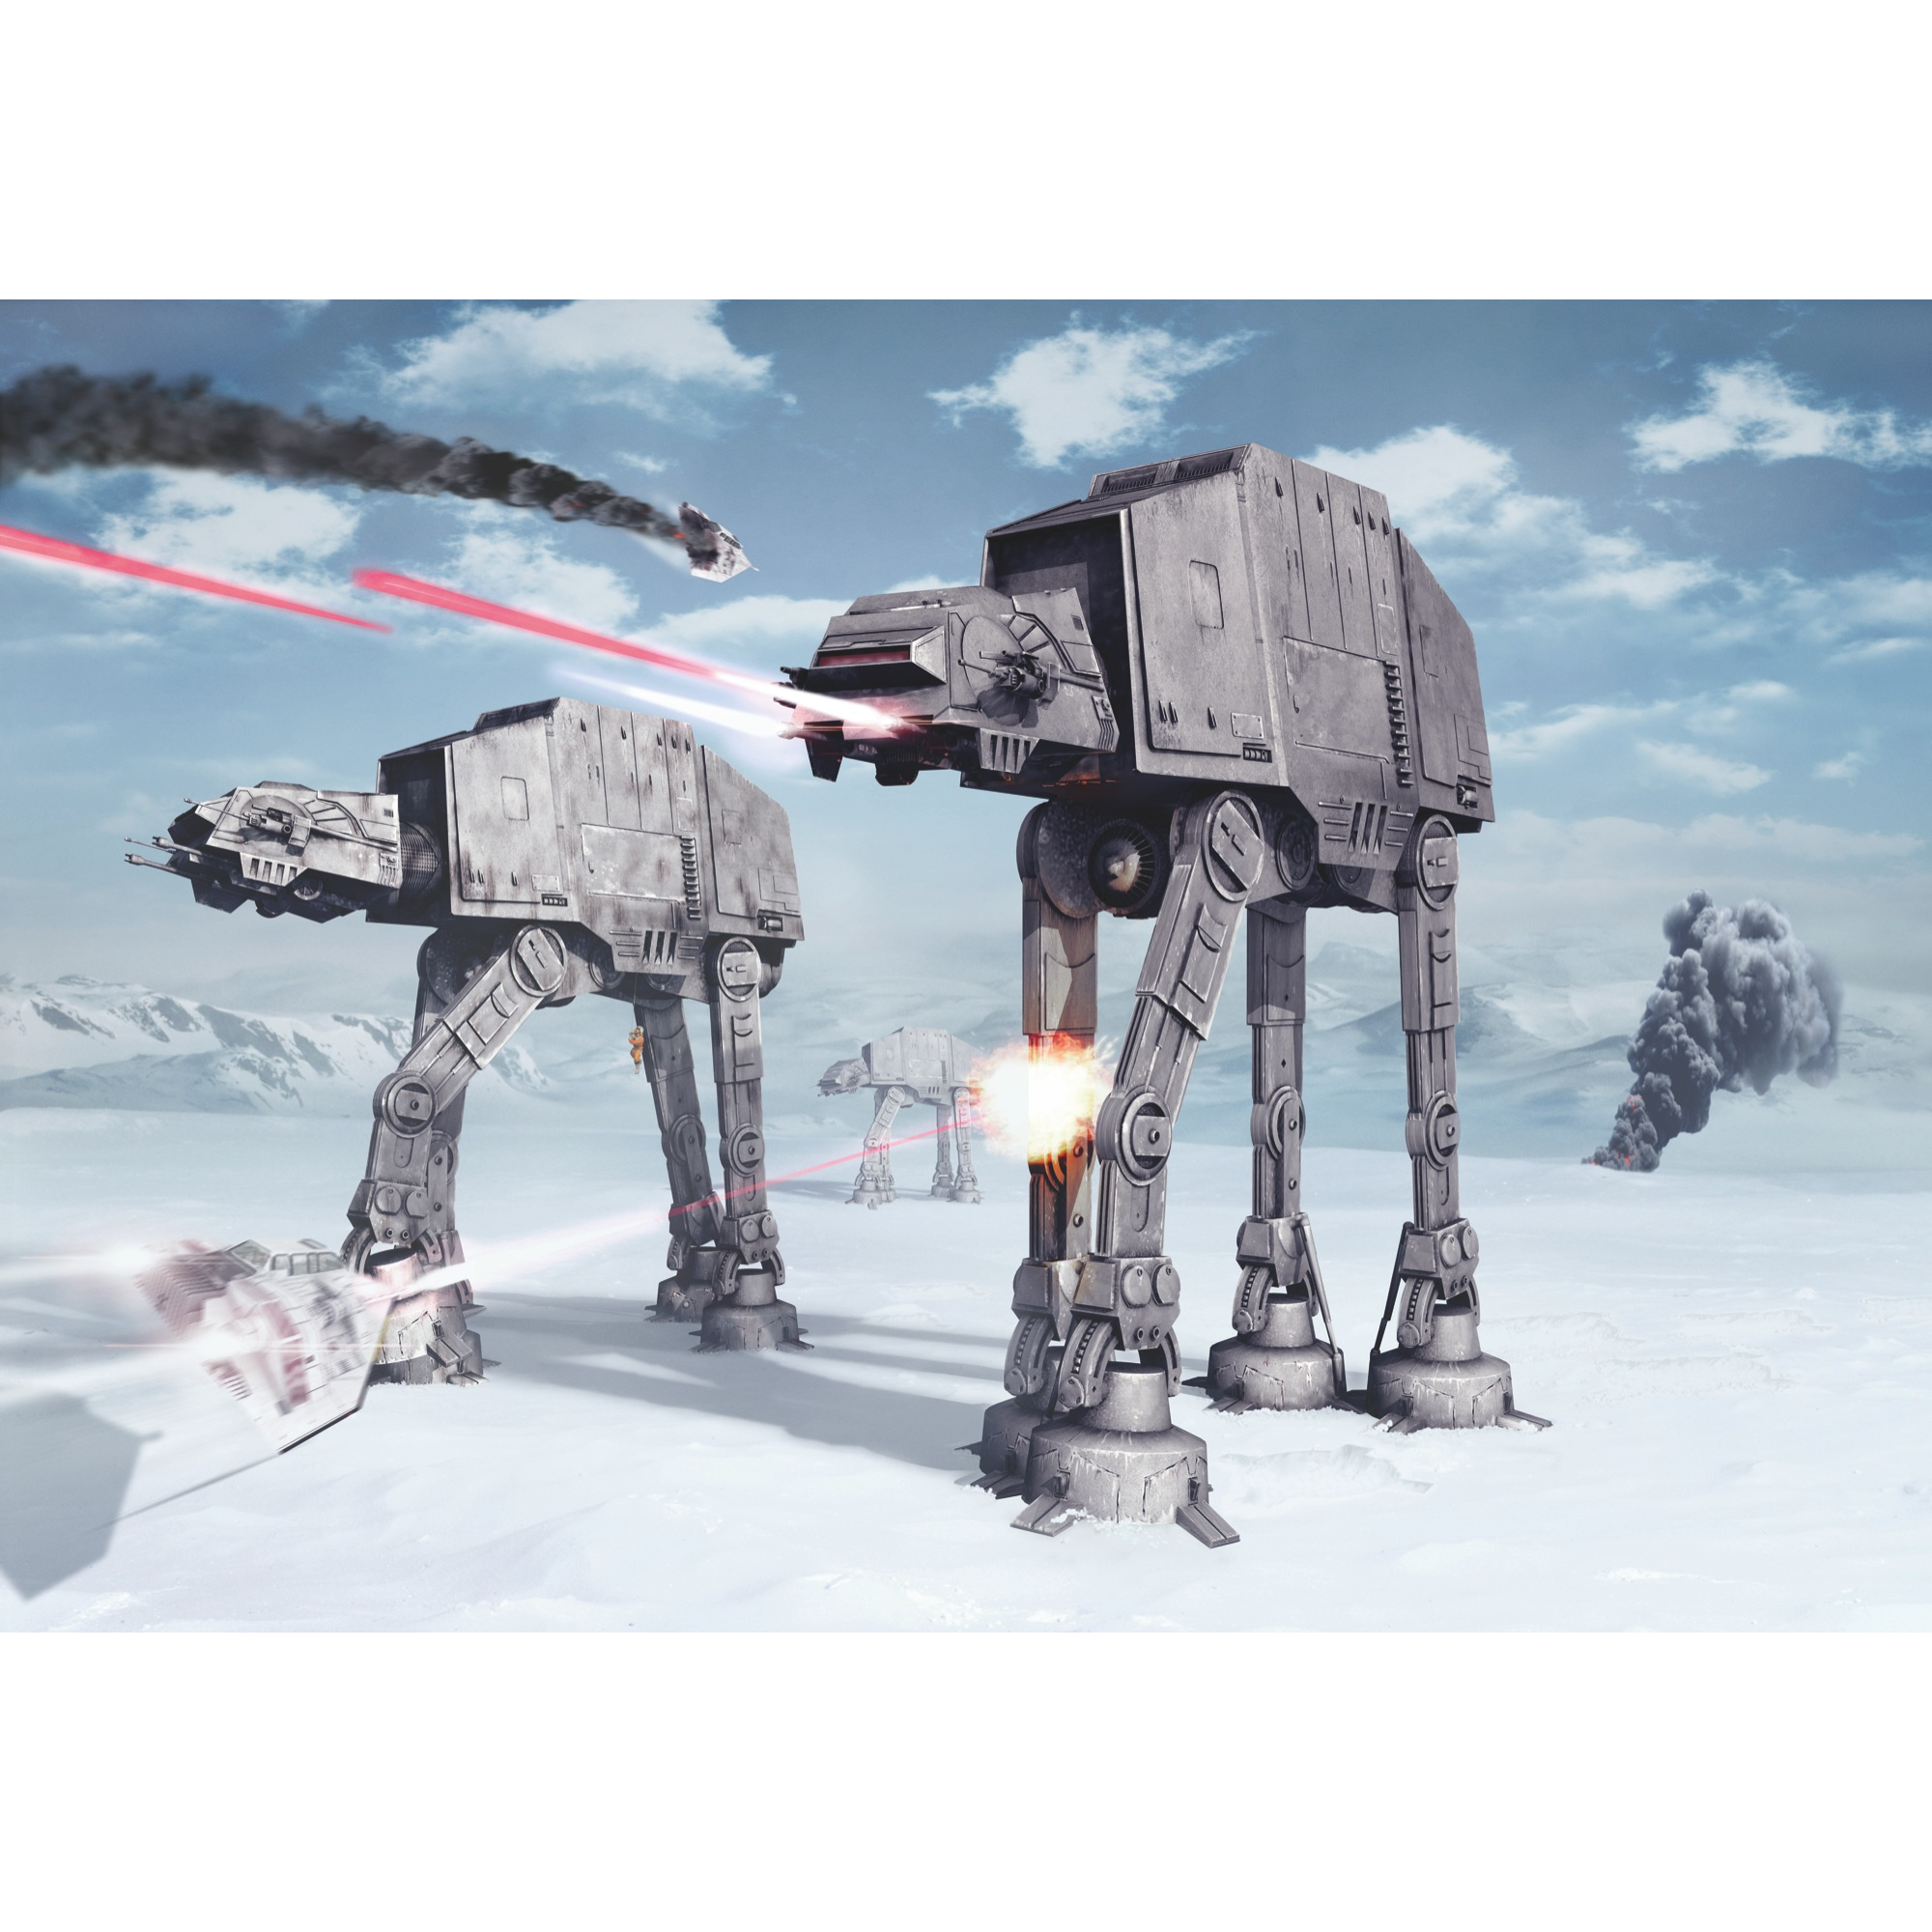 Fototapete 'Star Wars Battle of Hoth' 368 x 254 cm + product picture